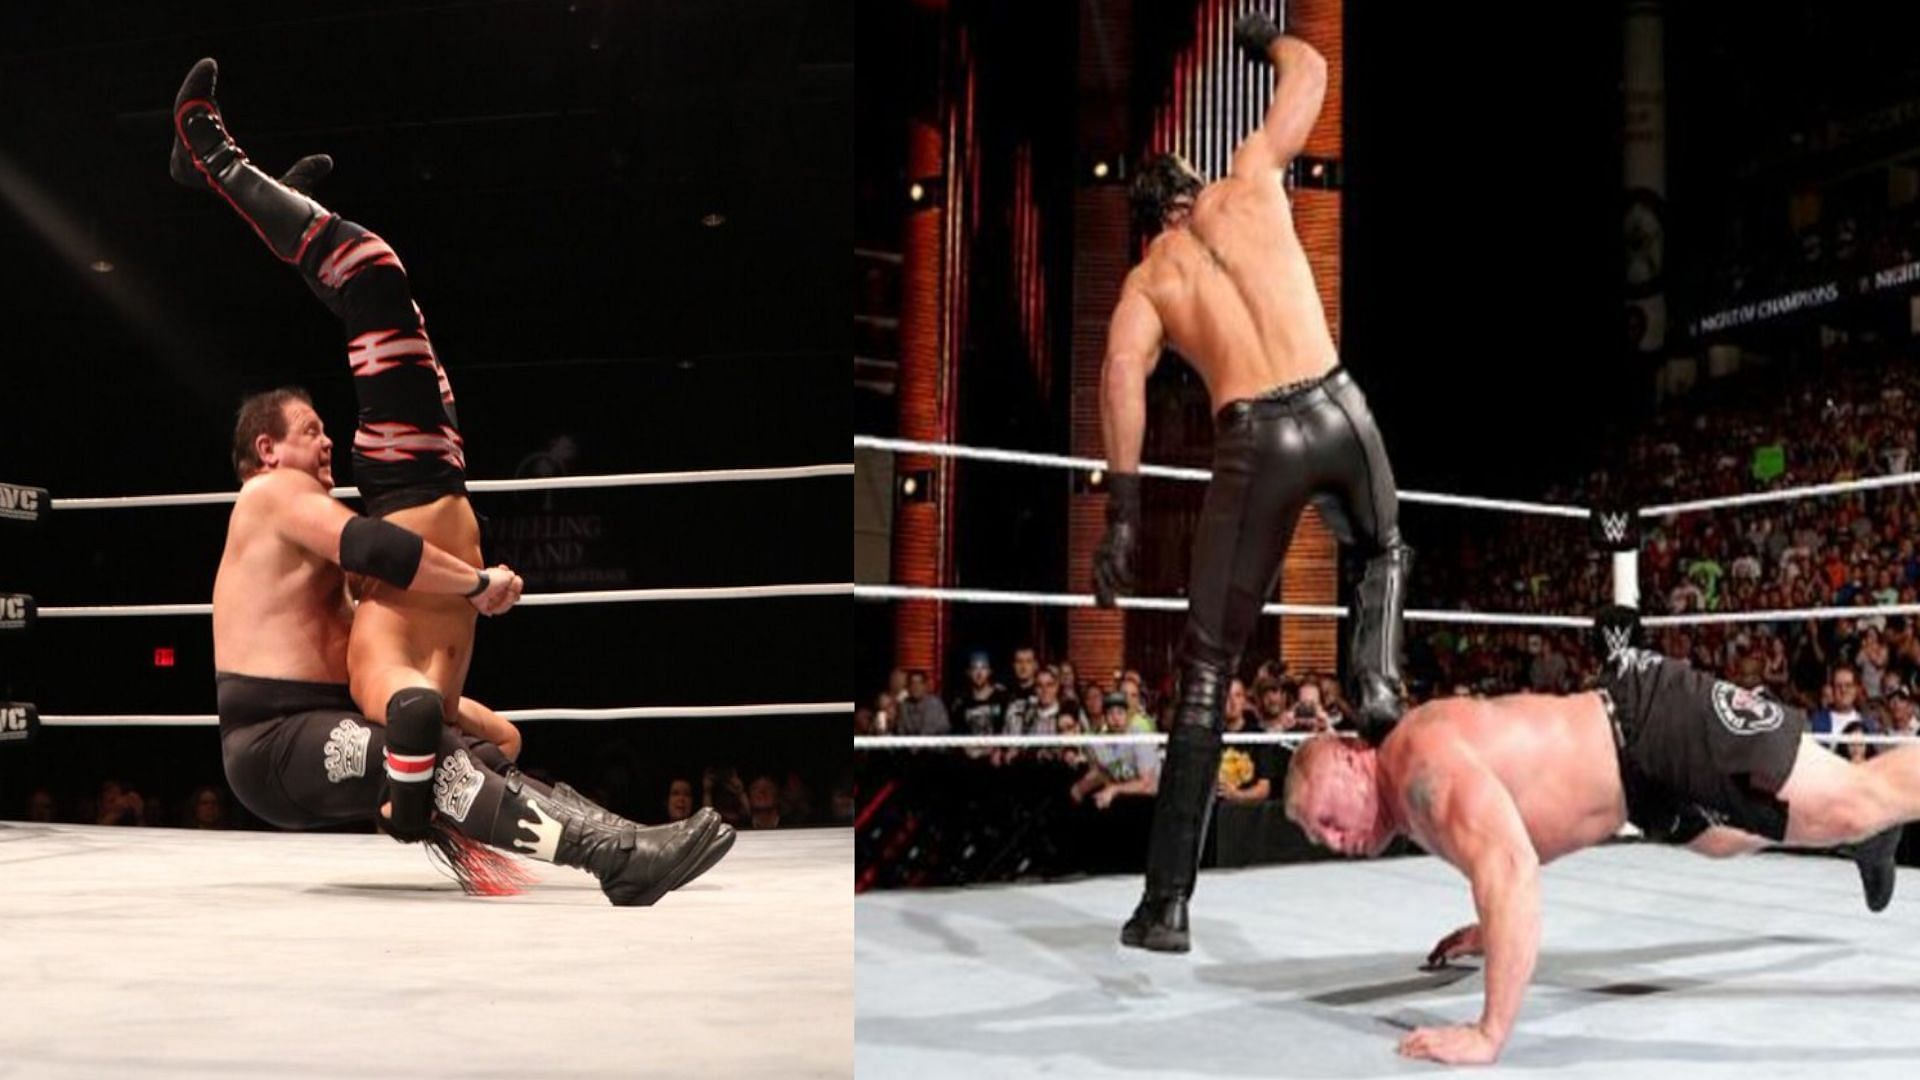 The Piledriver and The Stomp are two of the most lethal moves in WWE history.